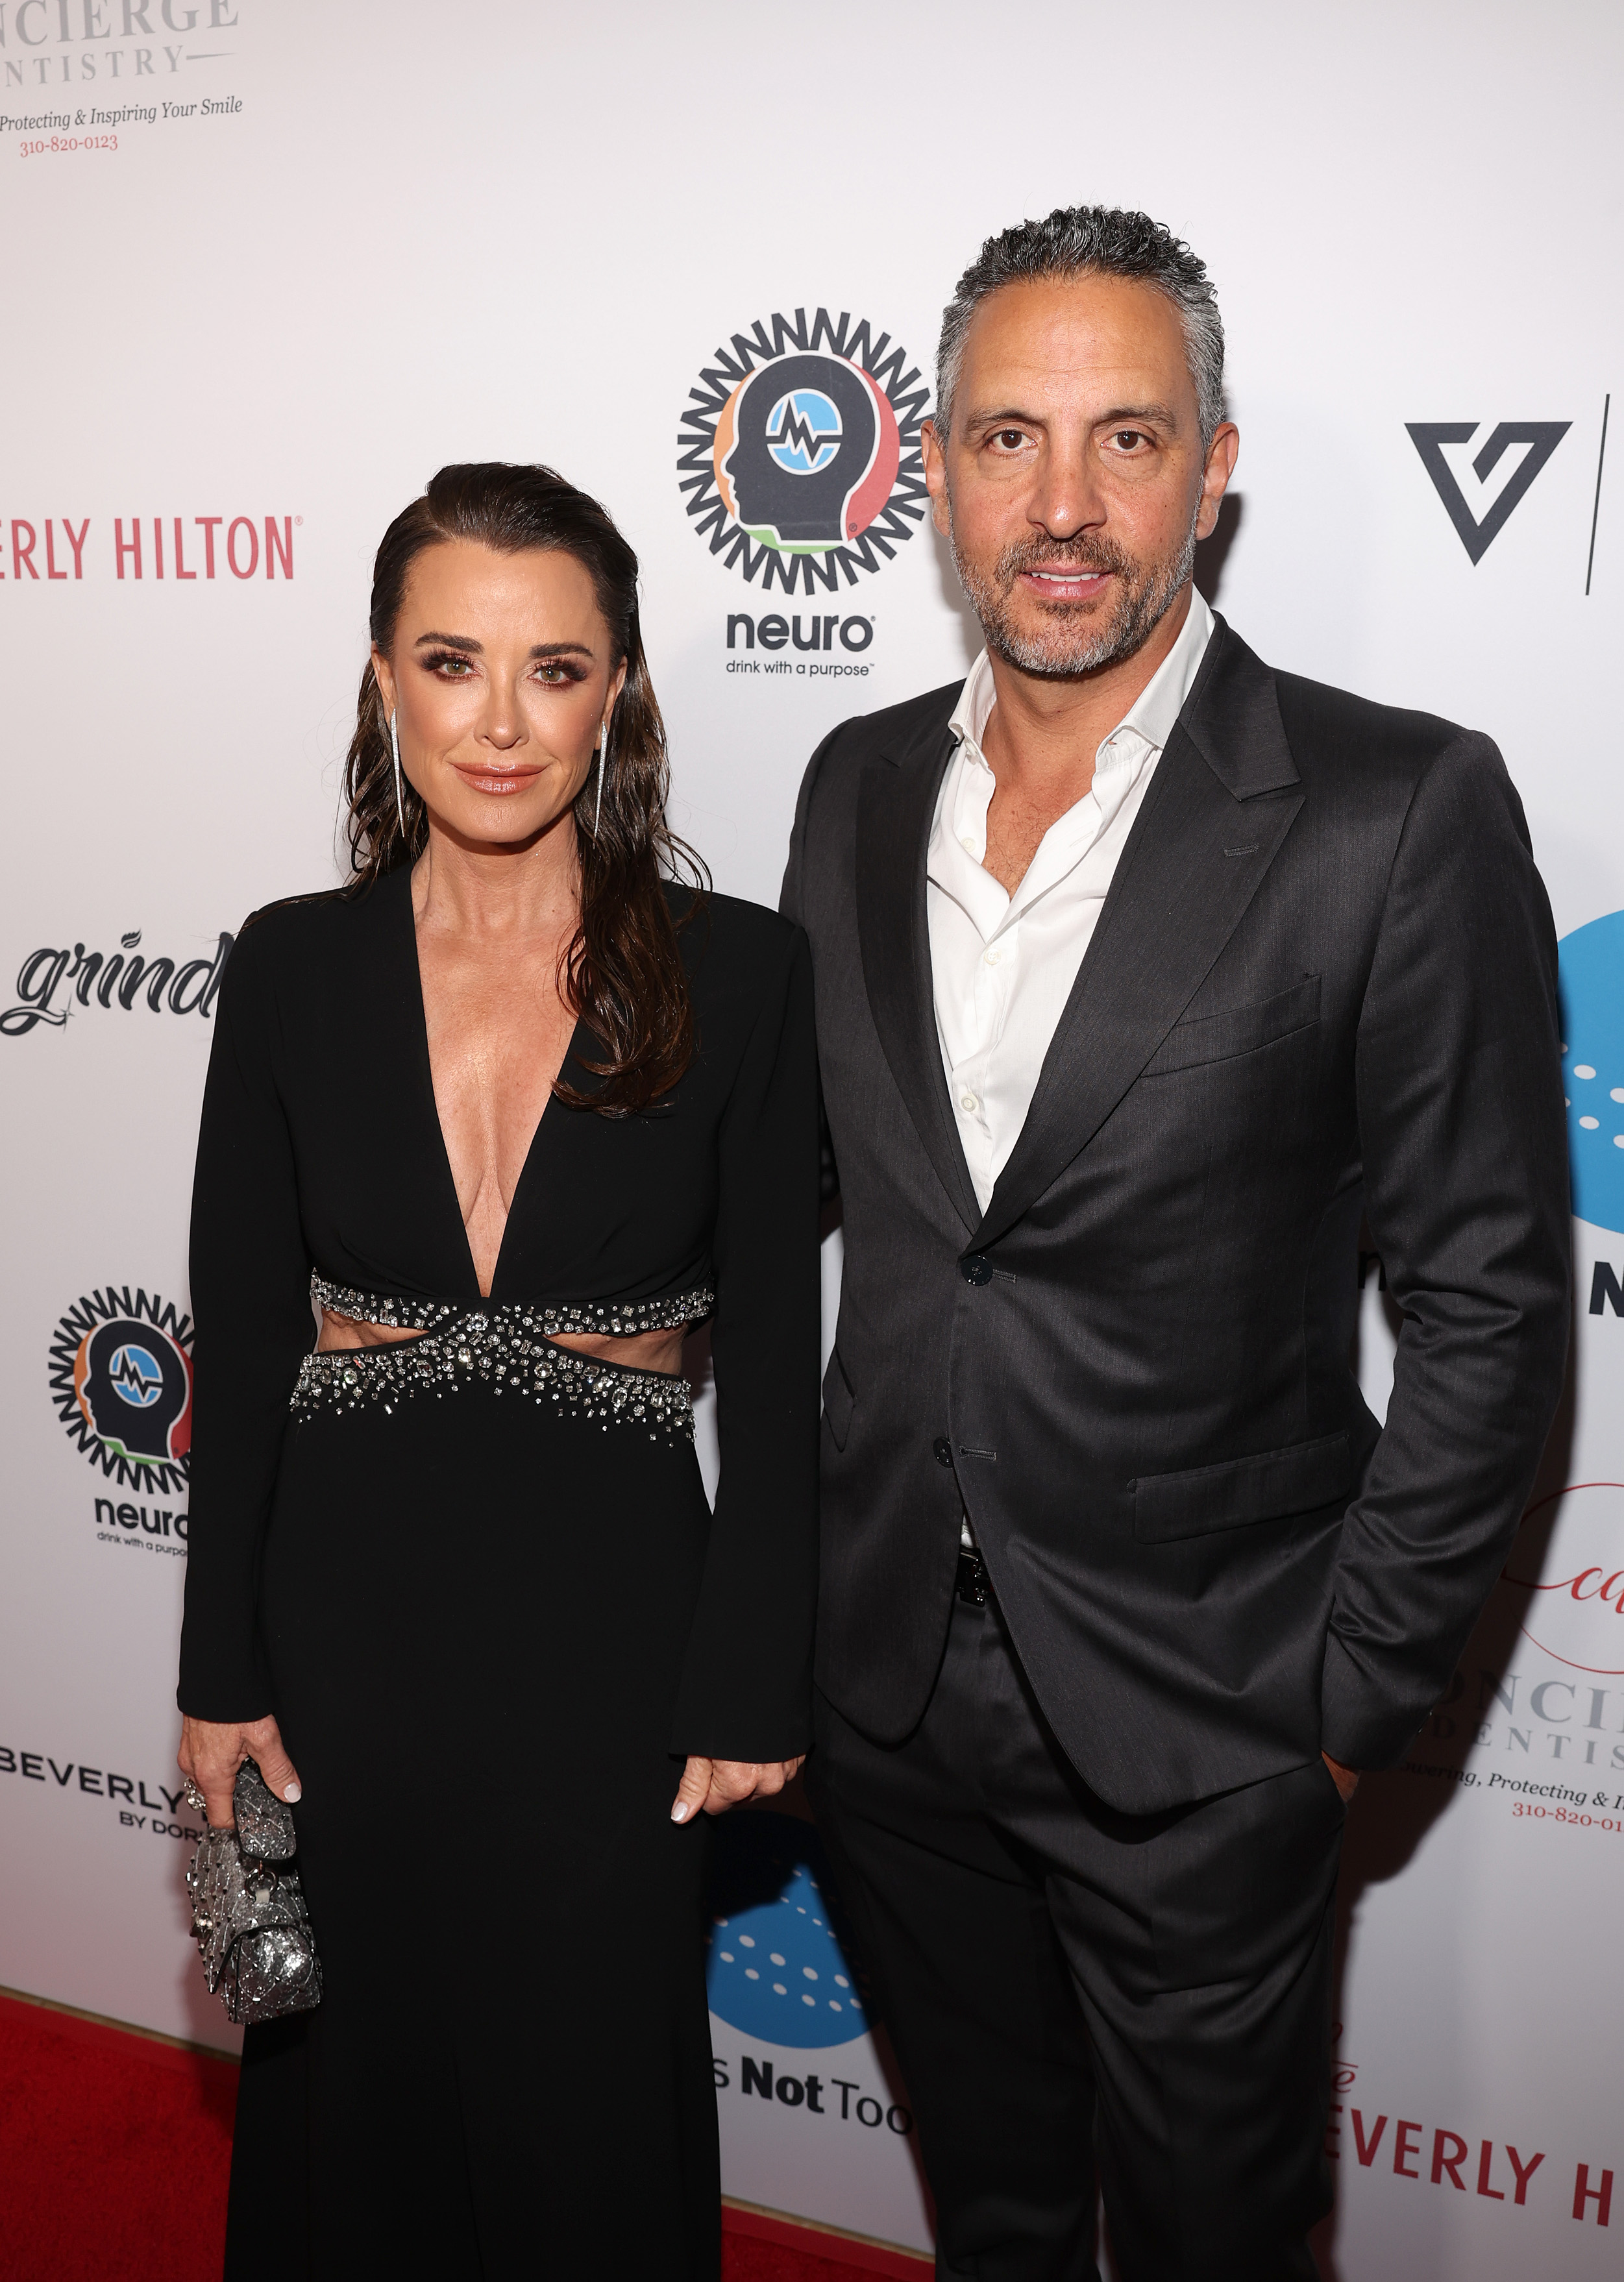 Mauricio has recently separated from RHOBH star Kyle Richards